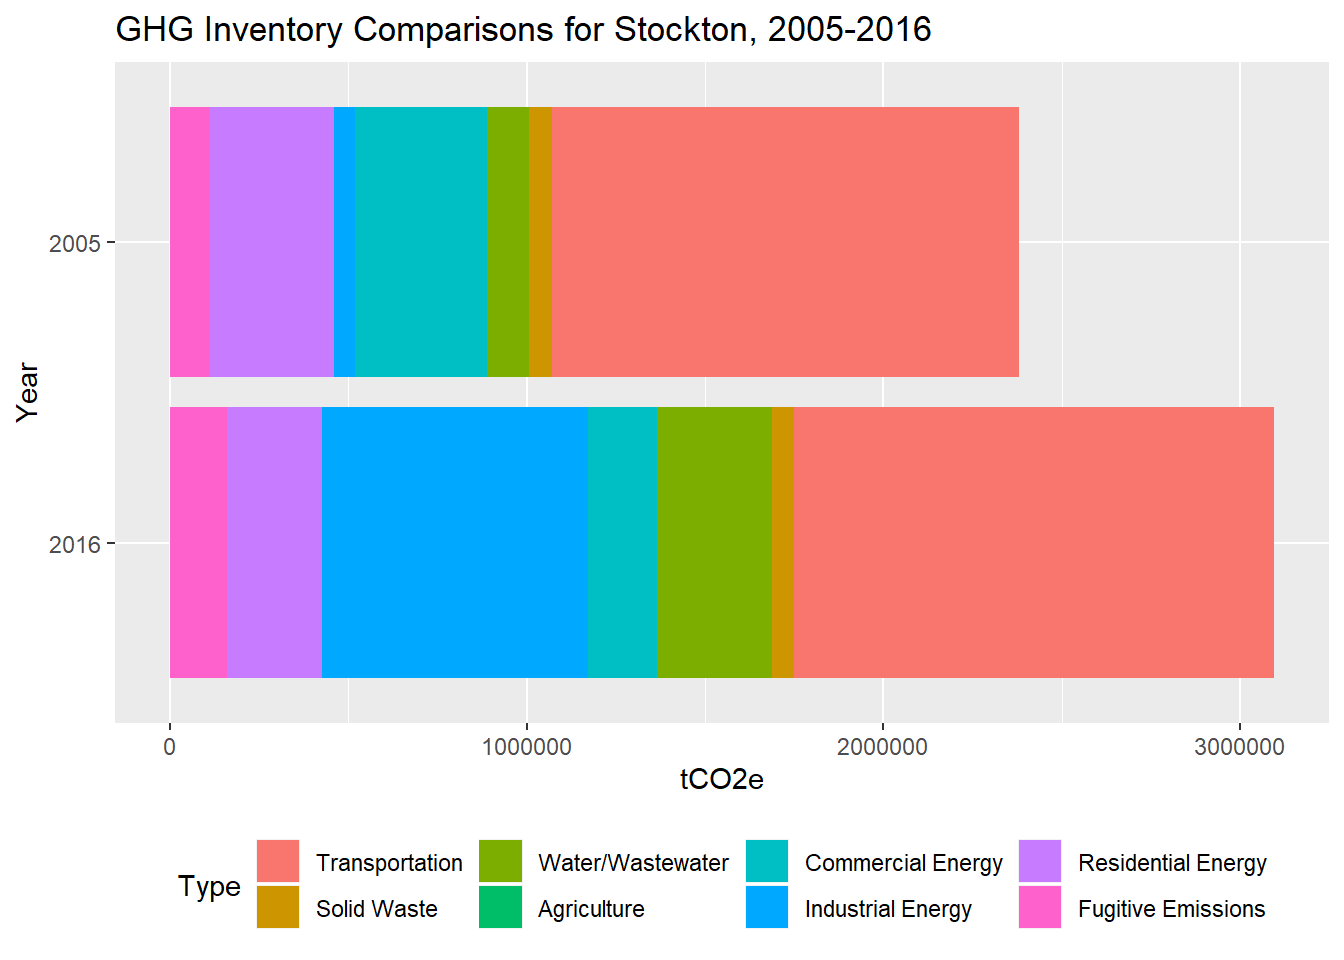 Inventory comparisons for Stockton 2005-2016, from ICLEI.